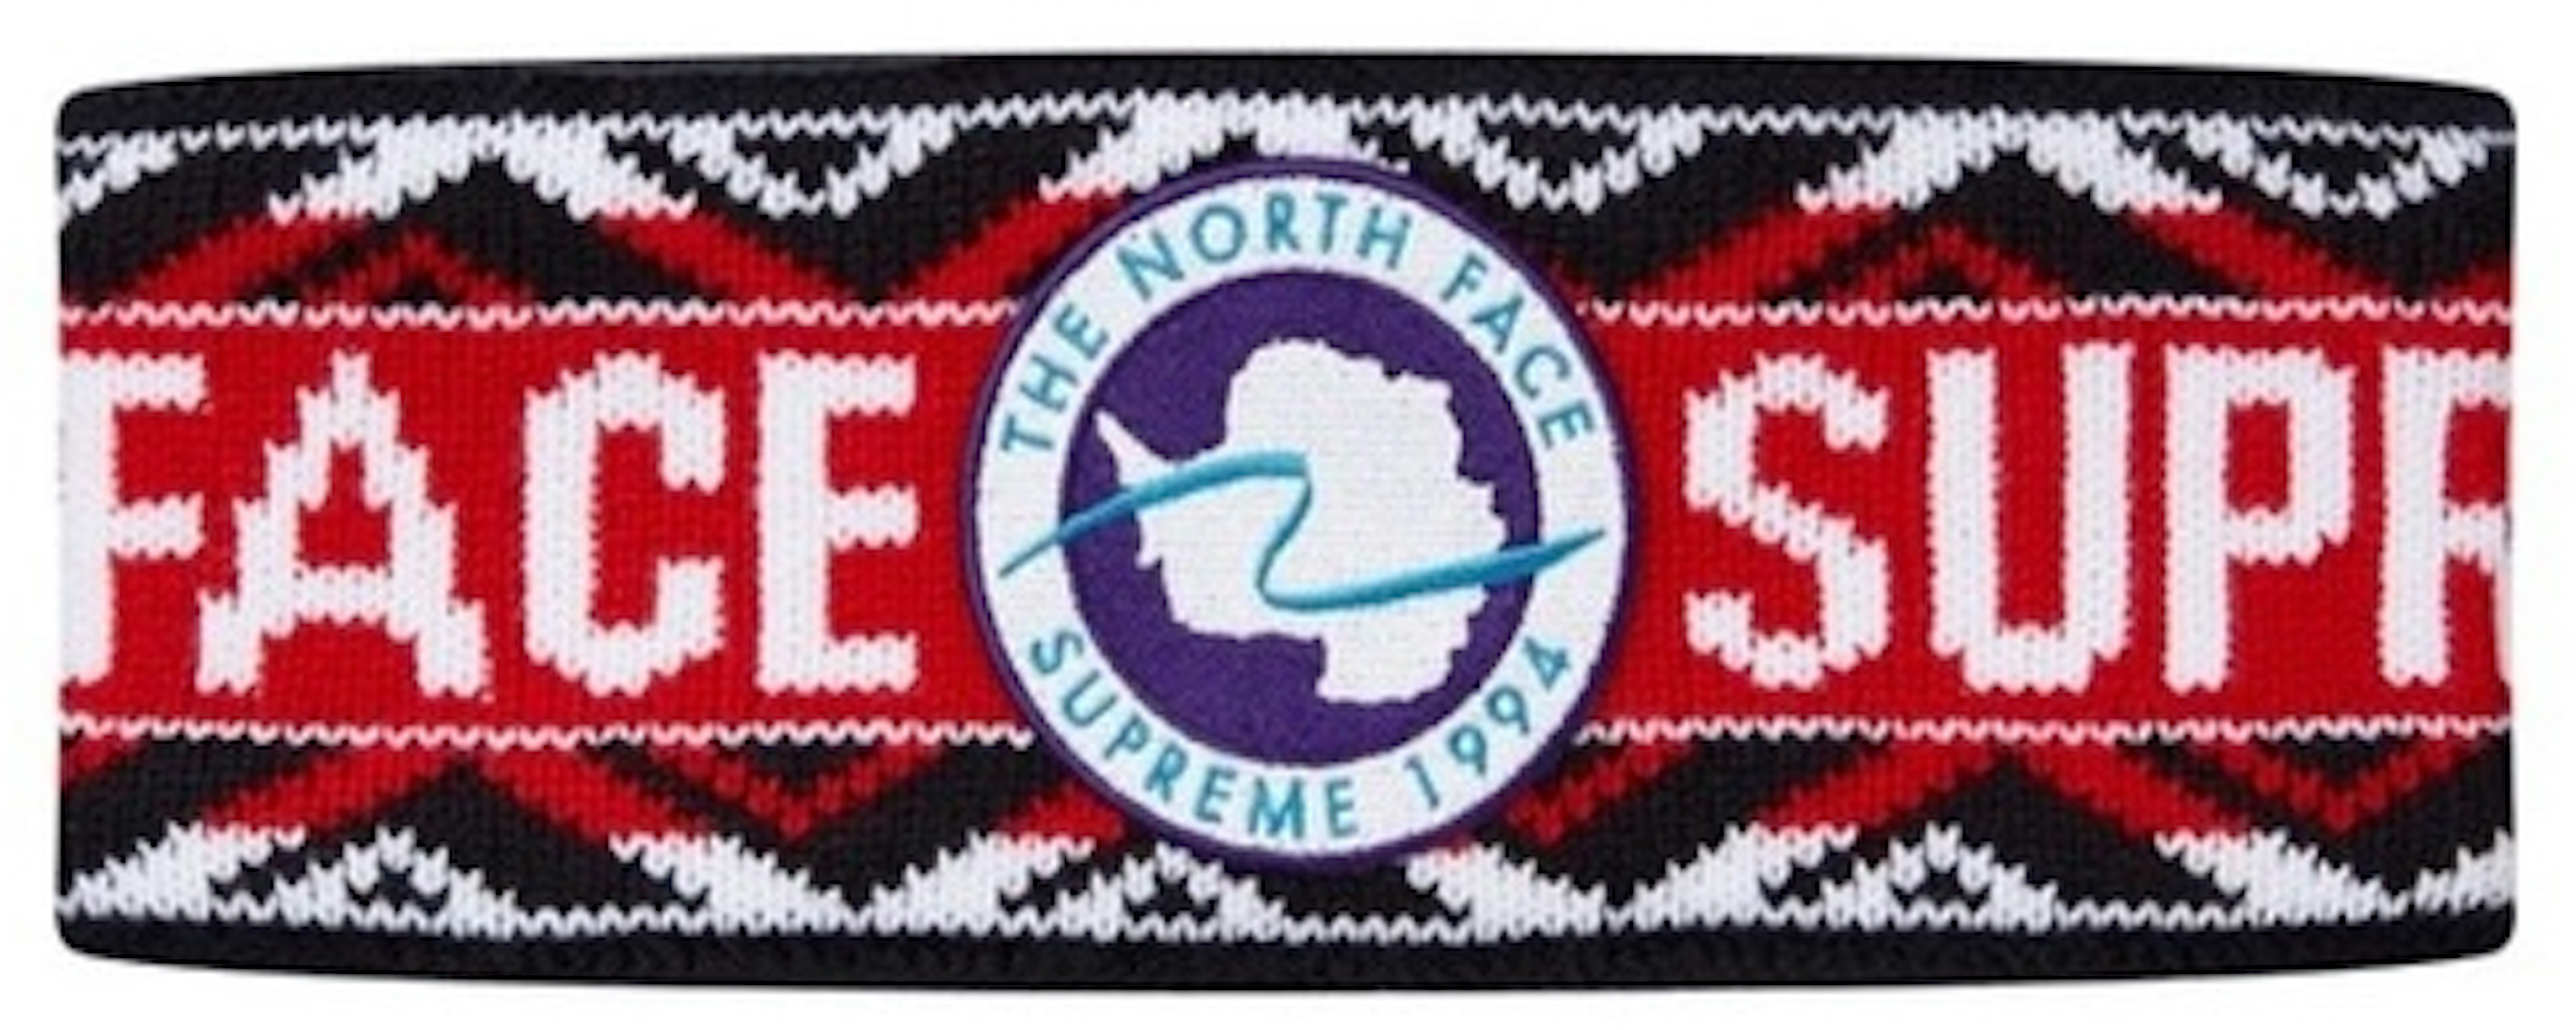 Supreme The North Face Trans Antarctica Expedition Headband Red - SS17